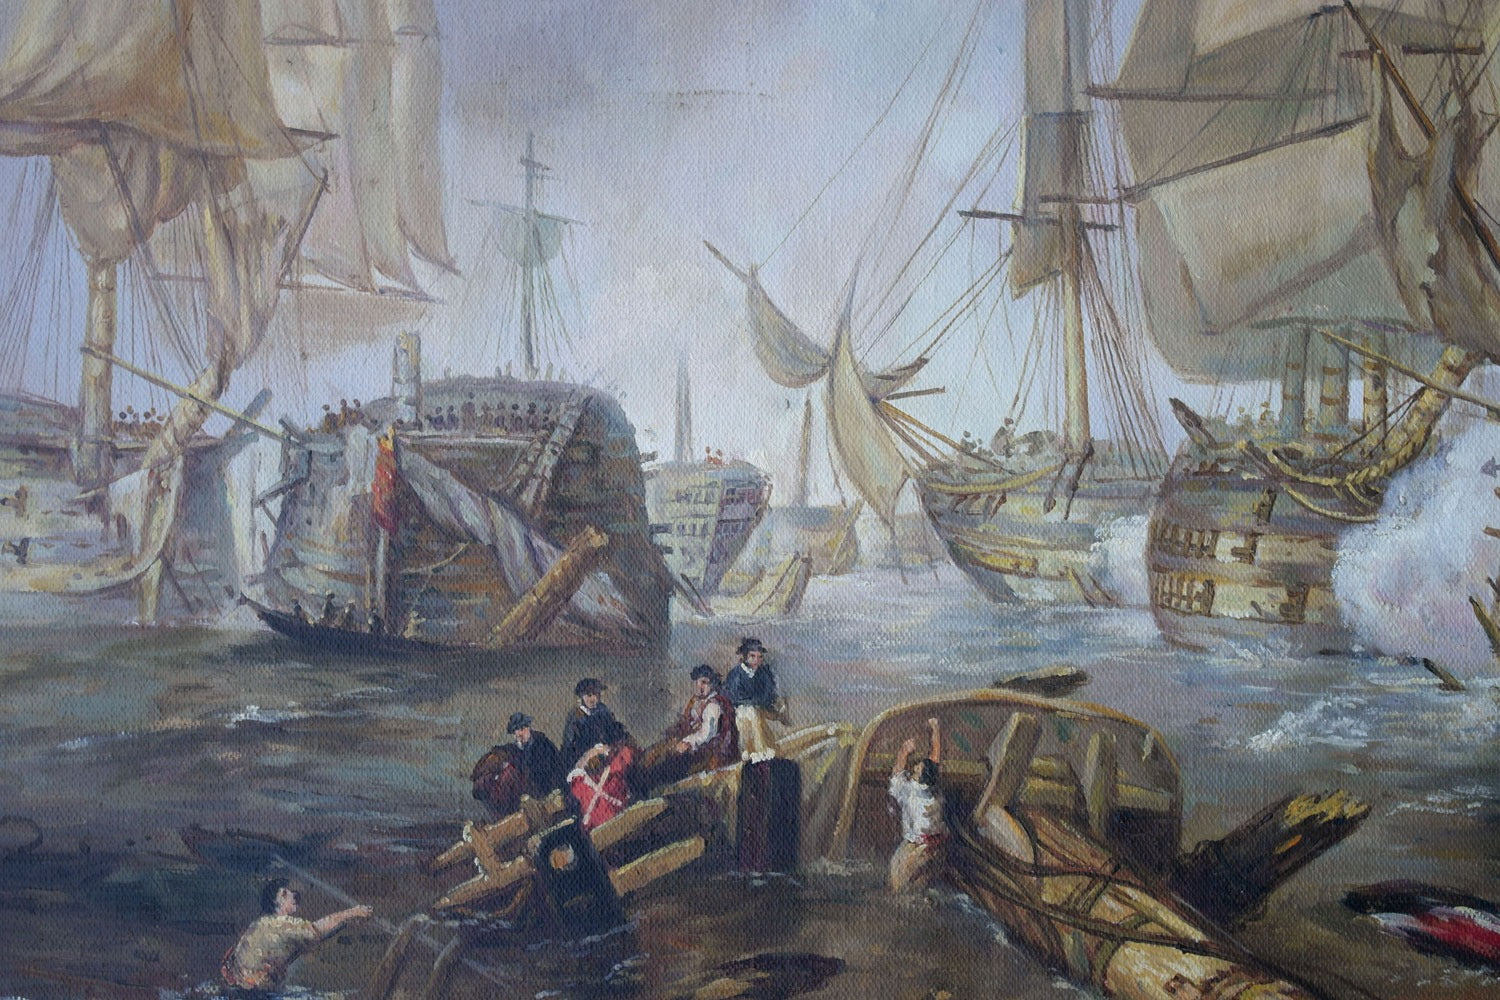 Oil Painting after 'The Battle of Trafalgar' in style of Clarkson Frederick Stanfield